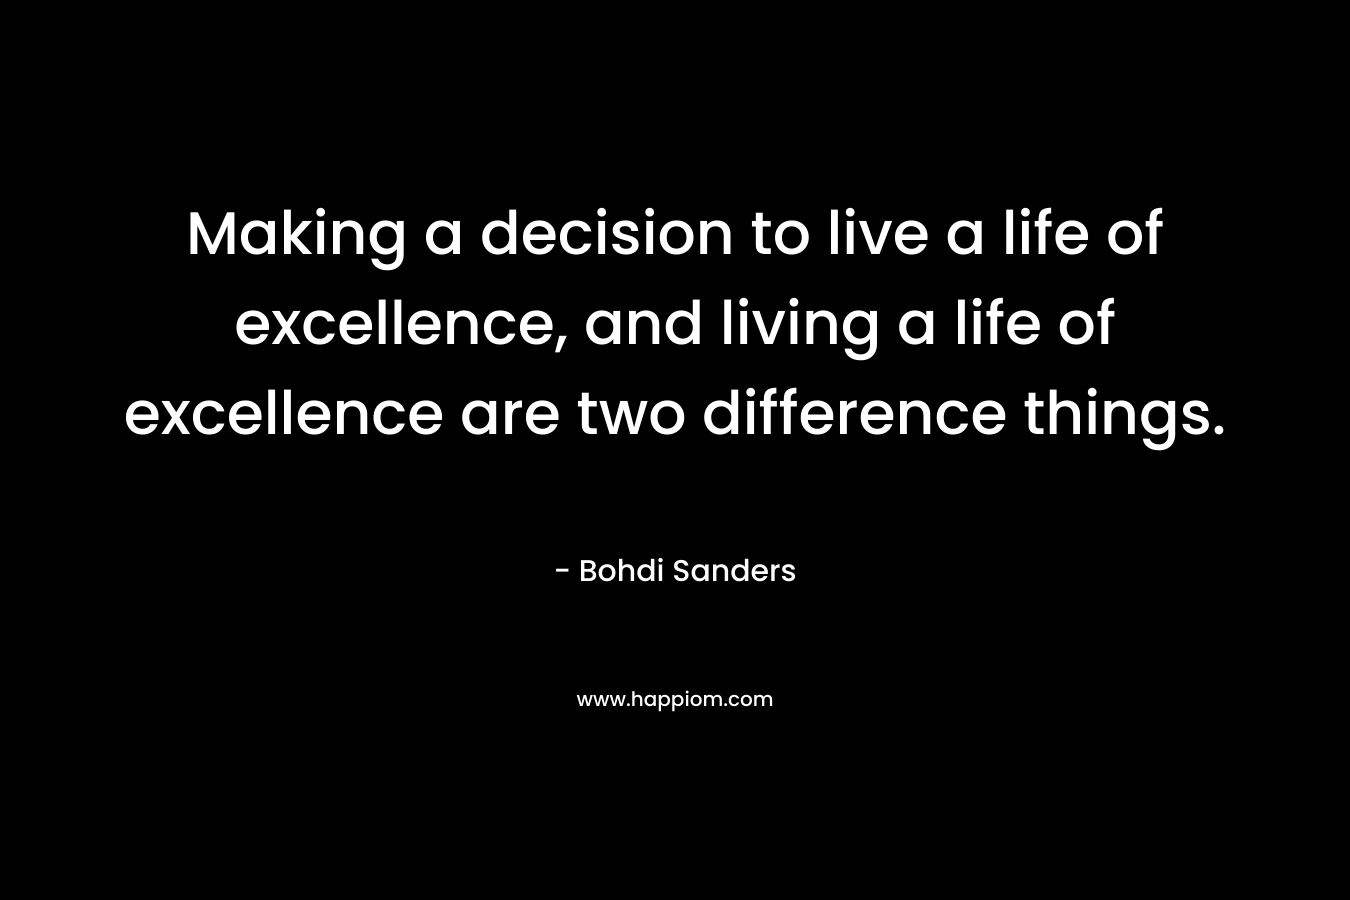 Making a decision to live a life of excellence, and living a life of excellence are two difference things.